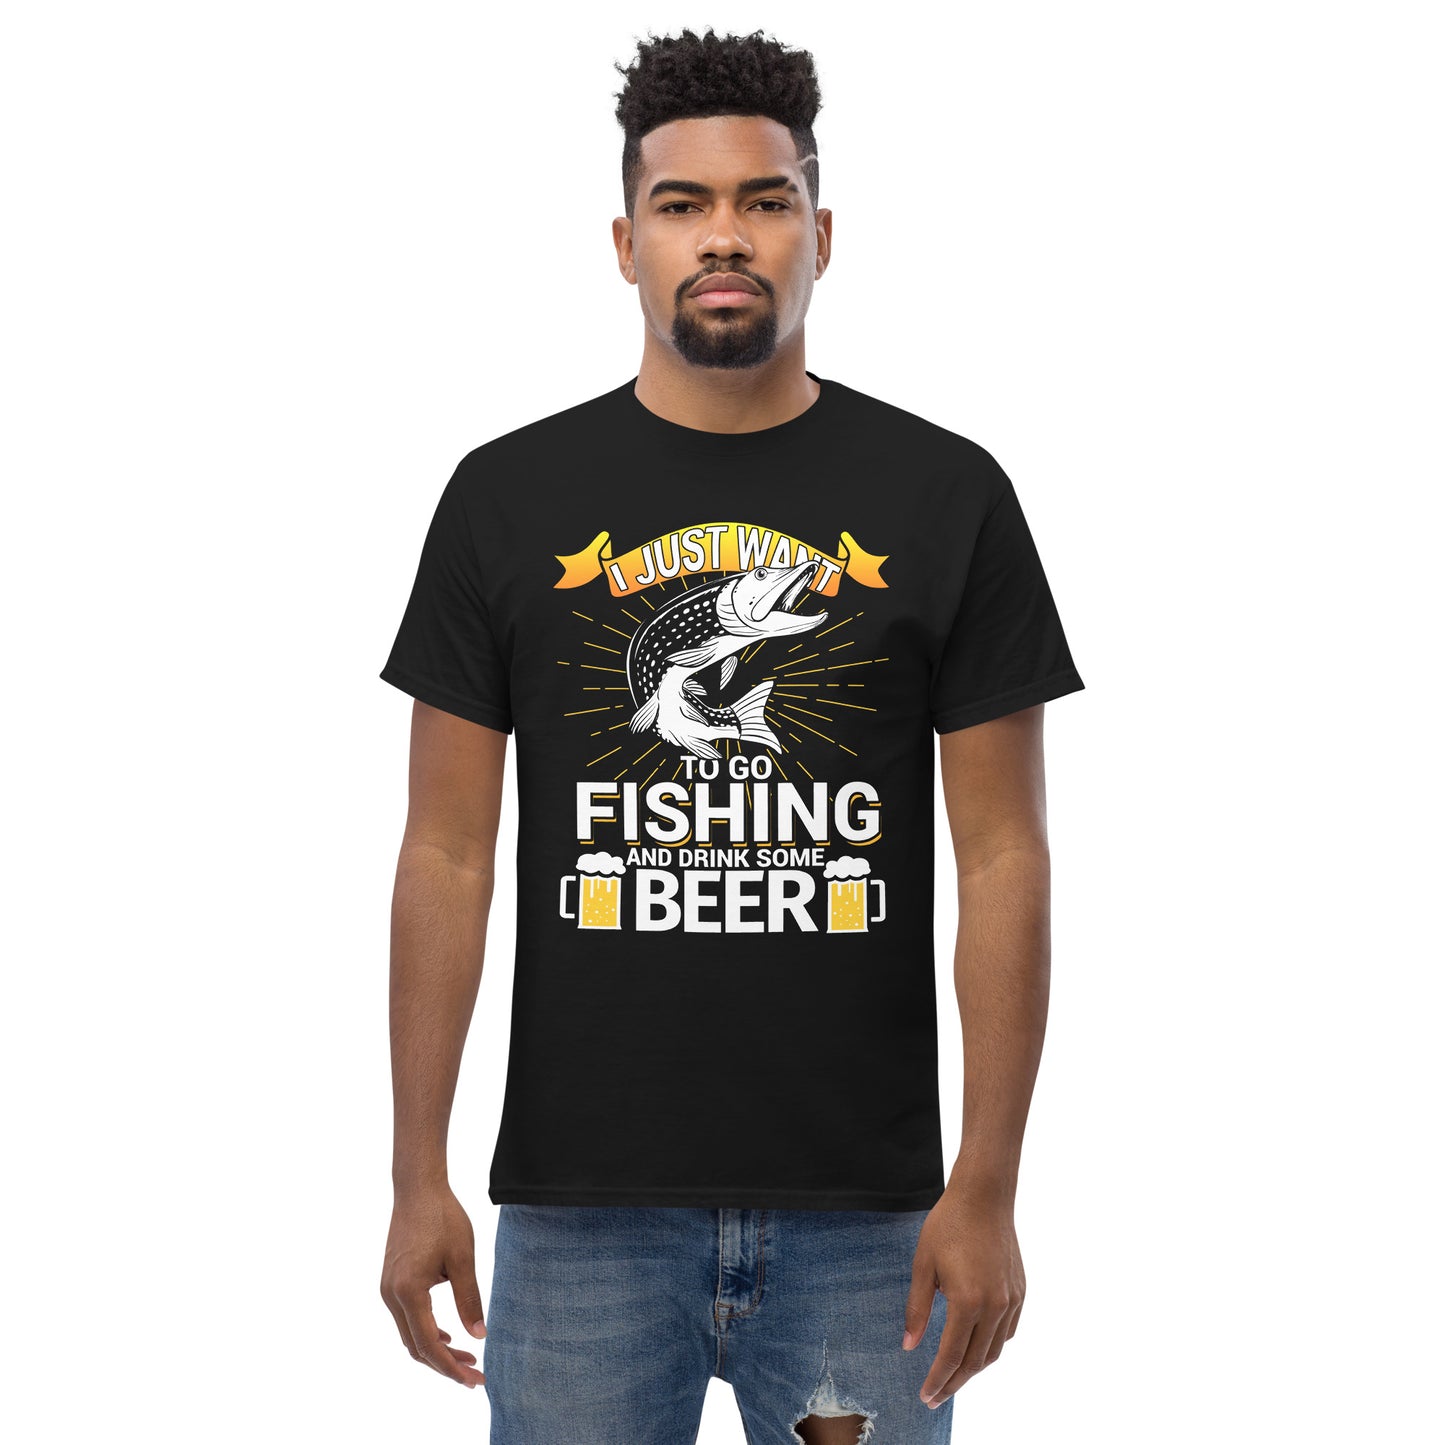 I Just Want To Go Fishing T-Shirt